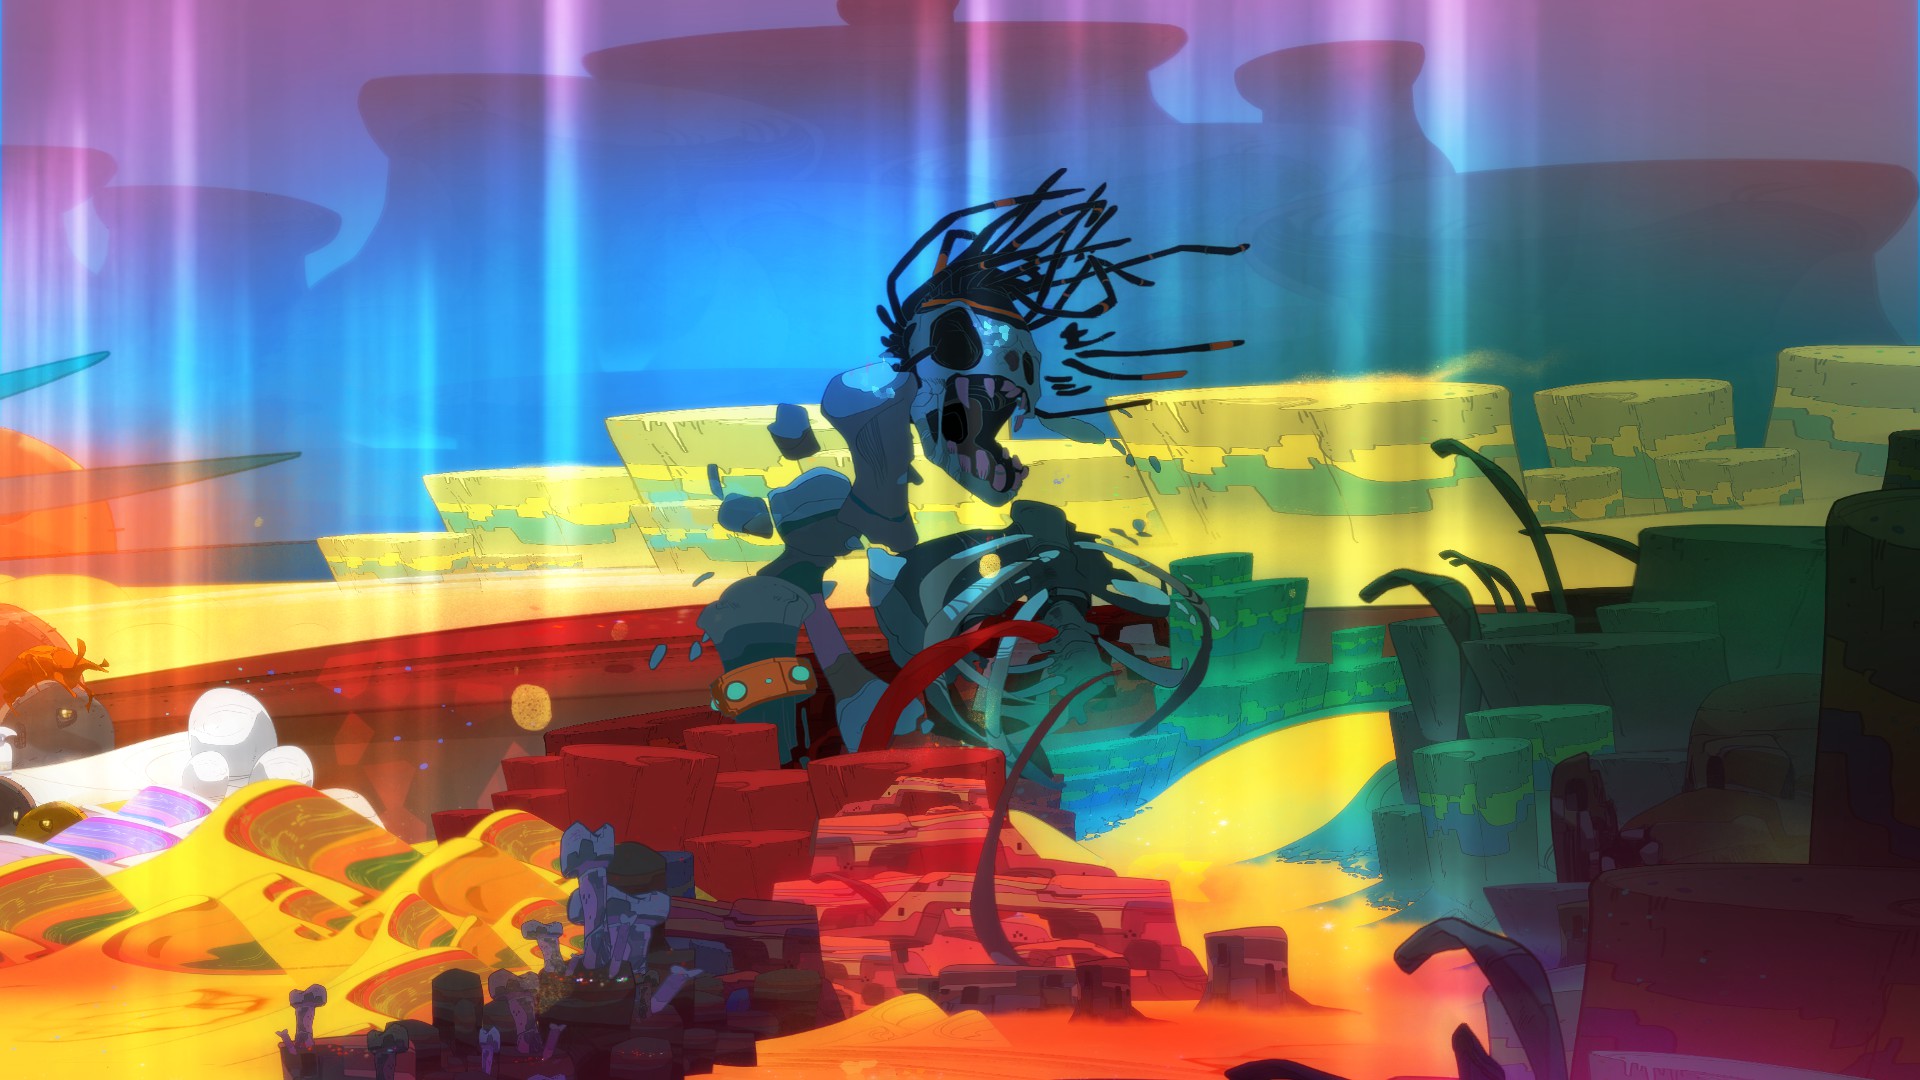 pyre game switch download free